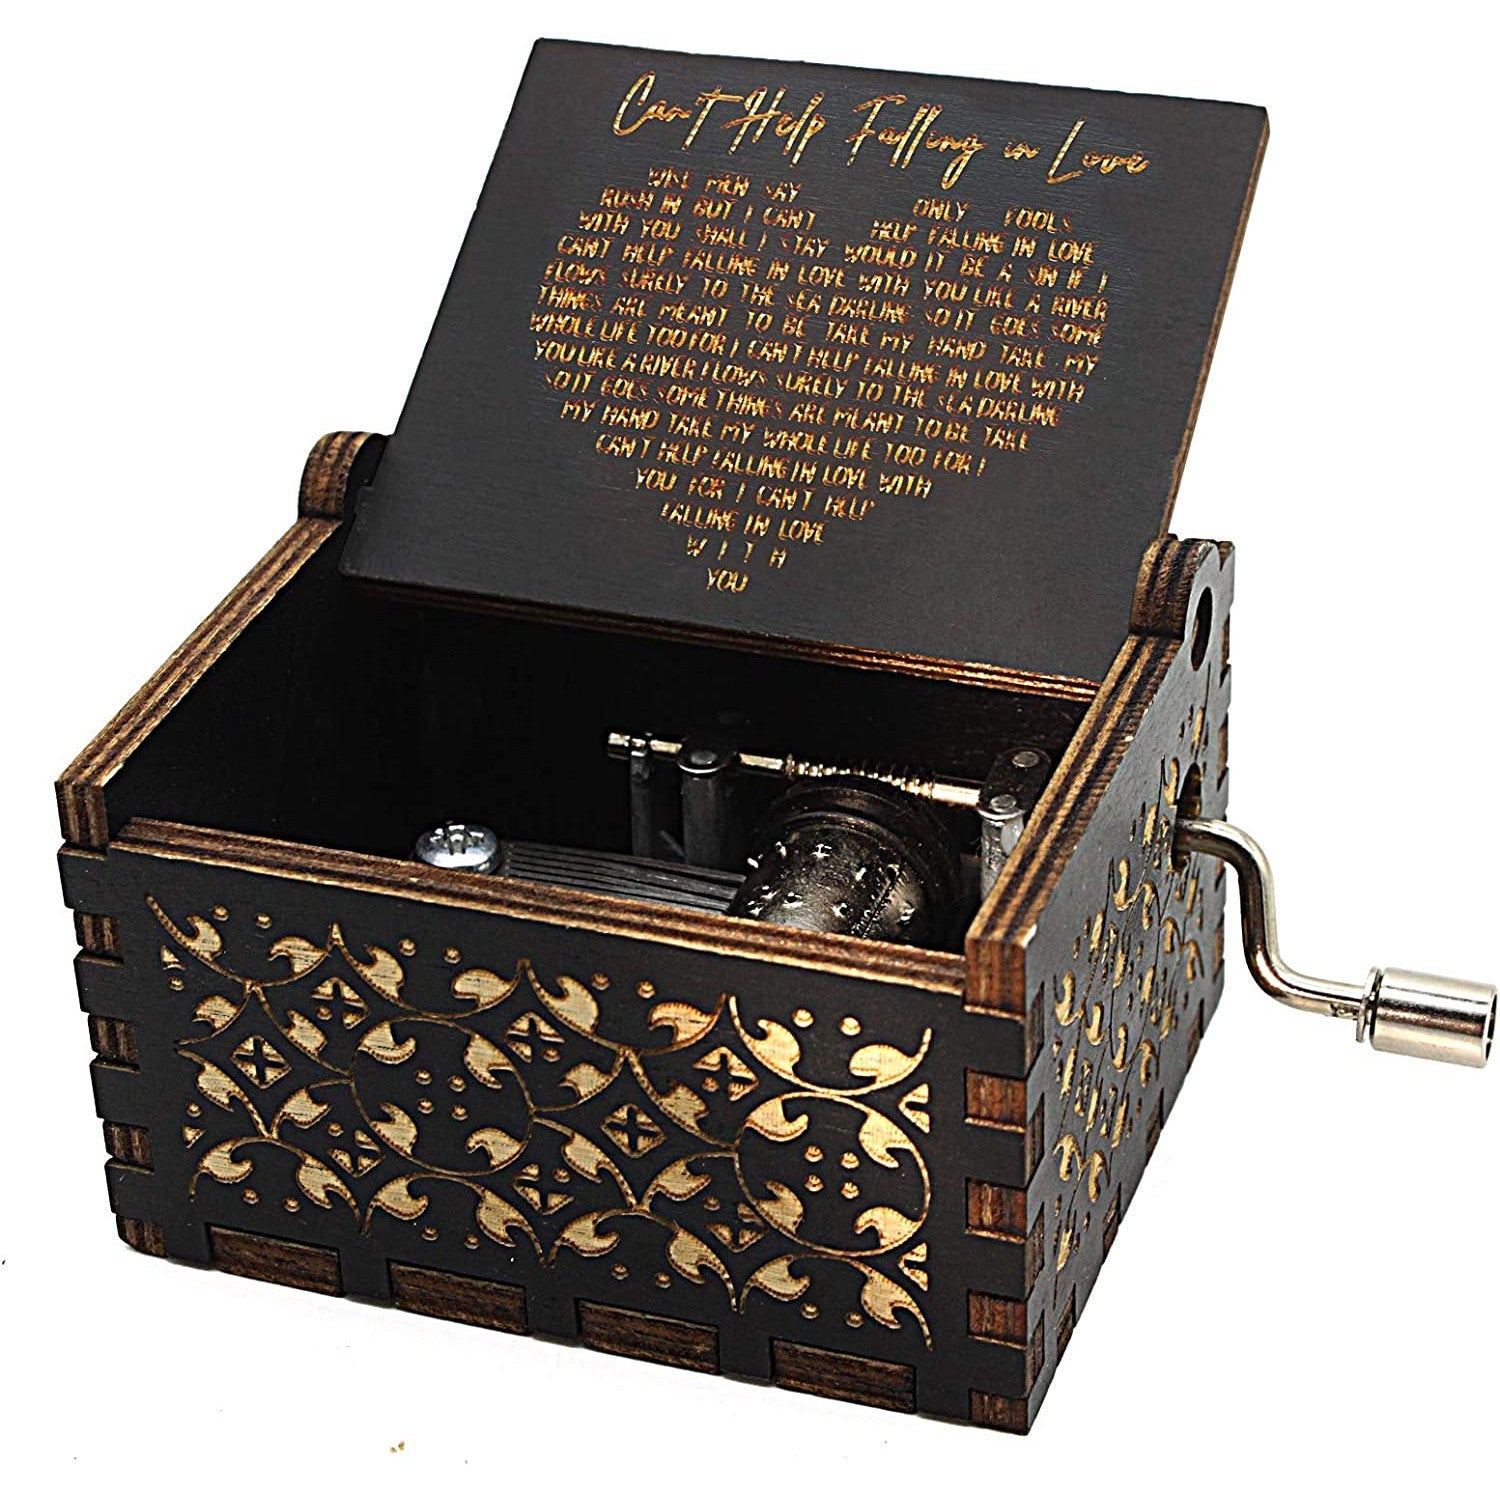 An antique style wooden music box with a crank handle and the lyrics for the song, 'Can't Help Falling In Love' engraved inside the lid.